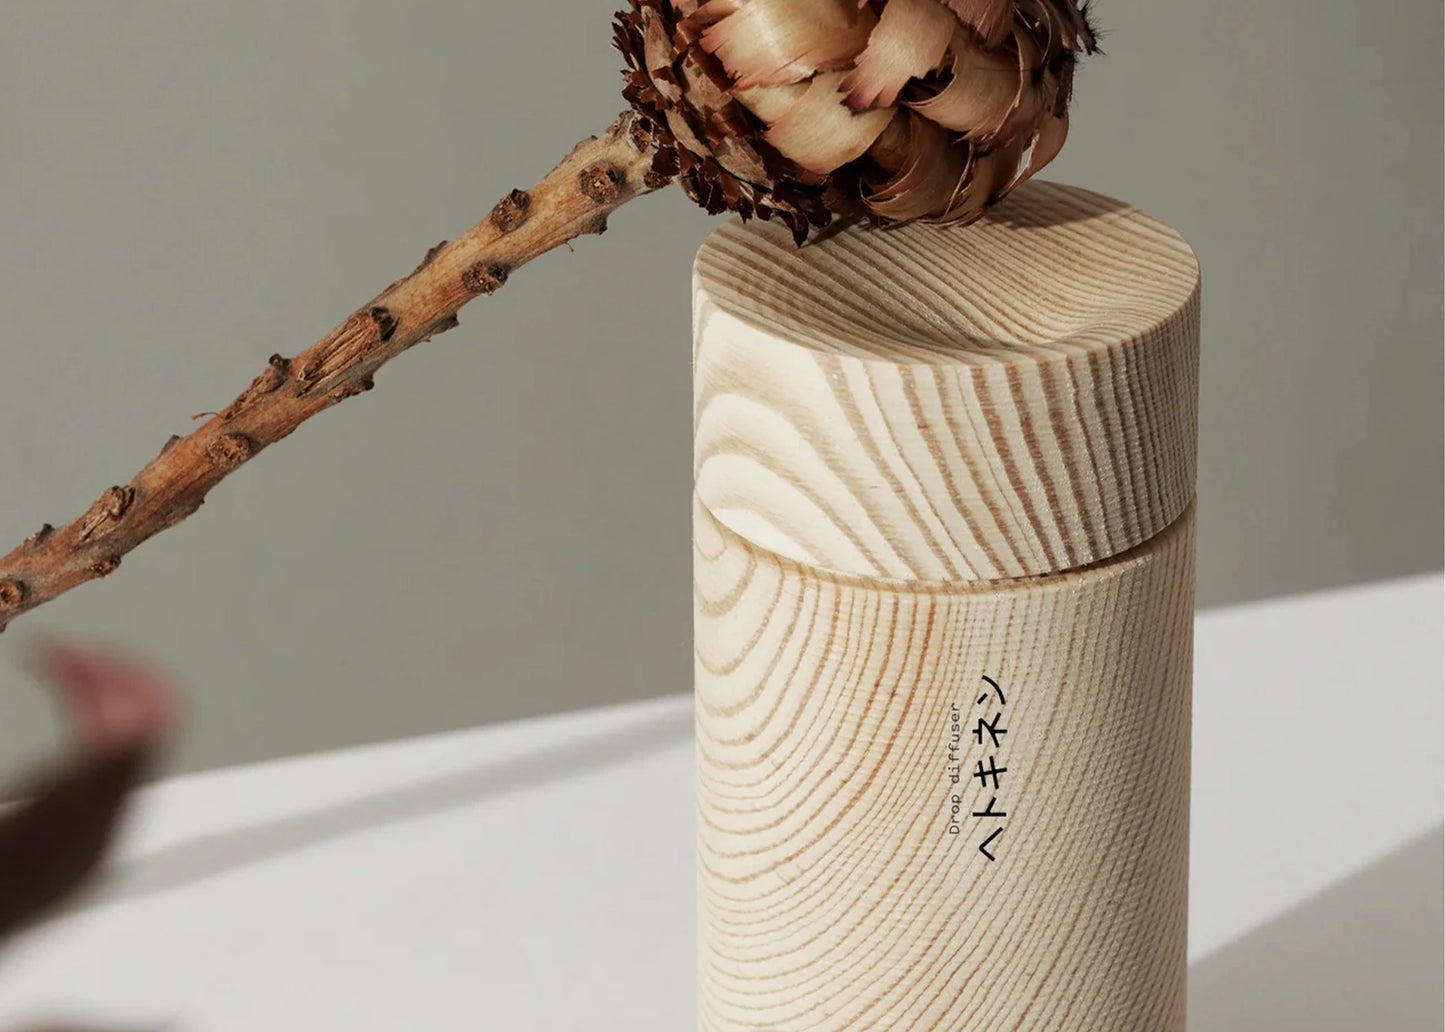 Hetkinen's Tall Drop Diffuser as sold by Woodland Mod next to a flower resting on a lid